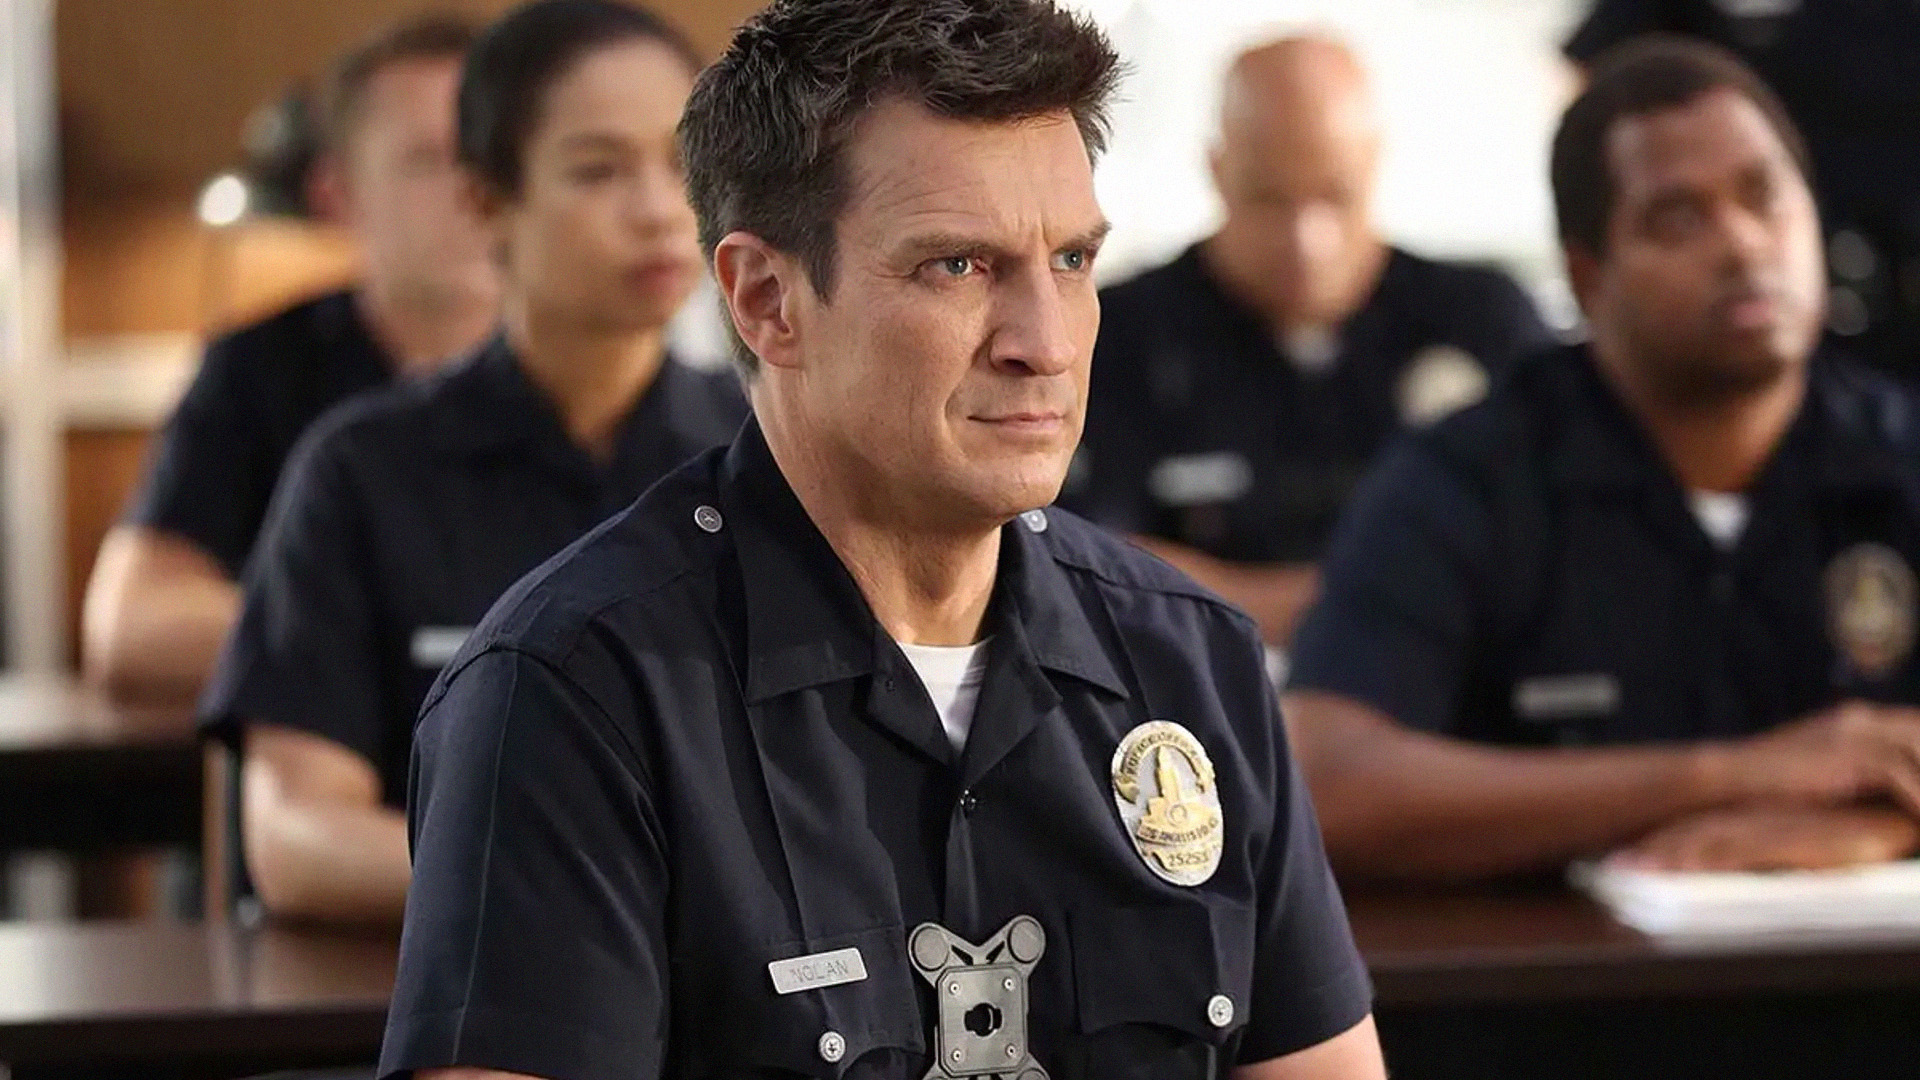 The Rookie's Identity Crisis: Is Nolan Losing the Spotlight on His Own Show?